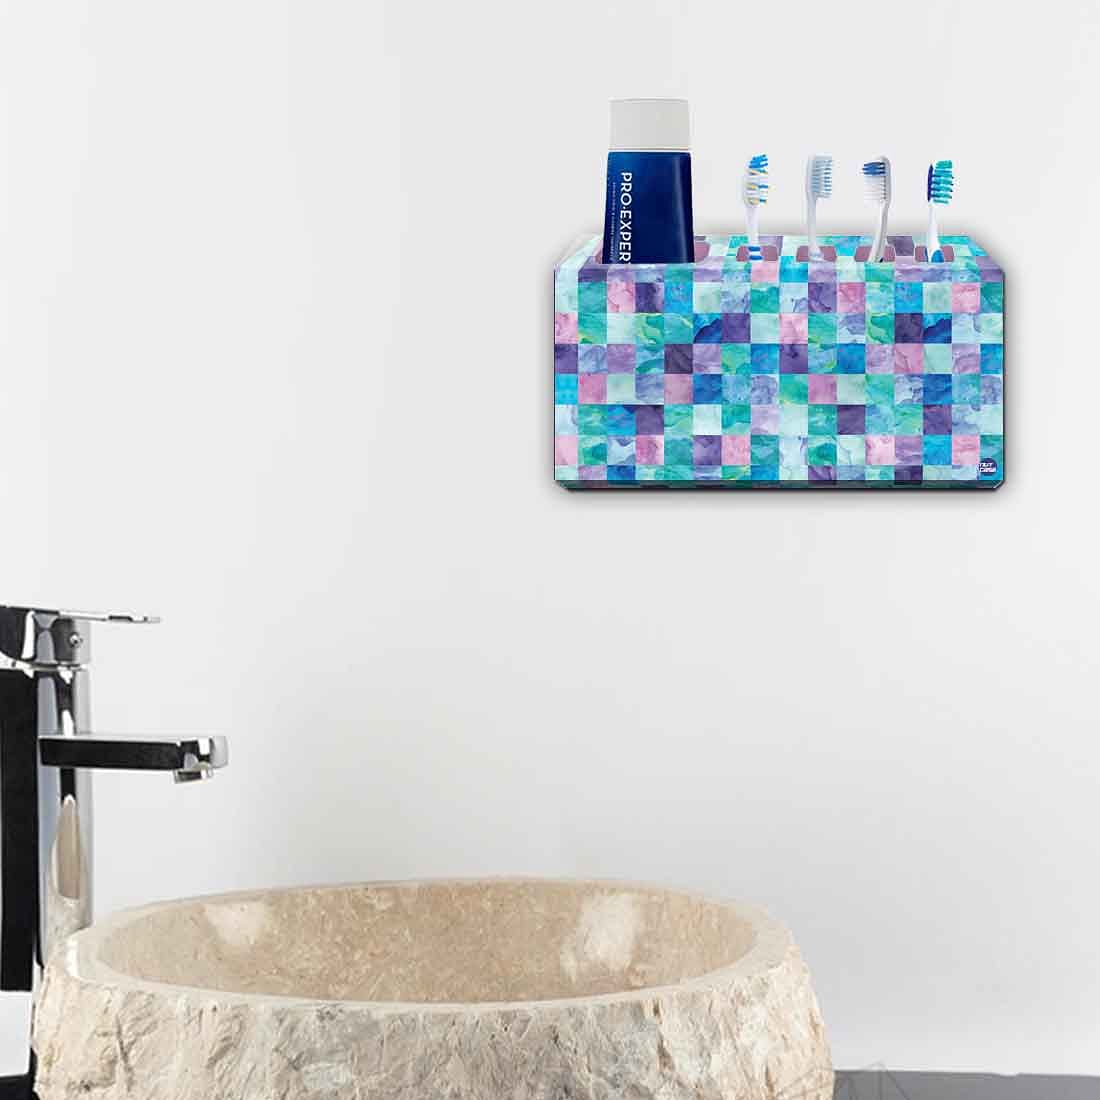 Toothbrush Holder Wall Mounted -Light Shade Marble Dots Nutcase